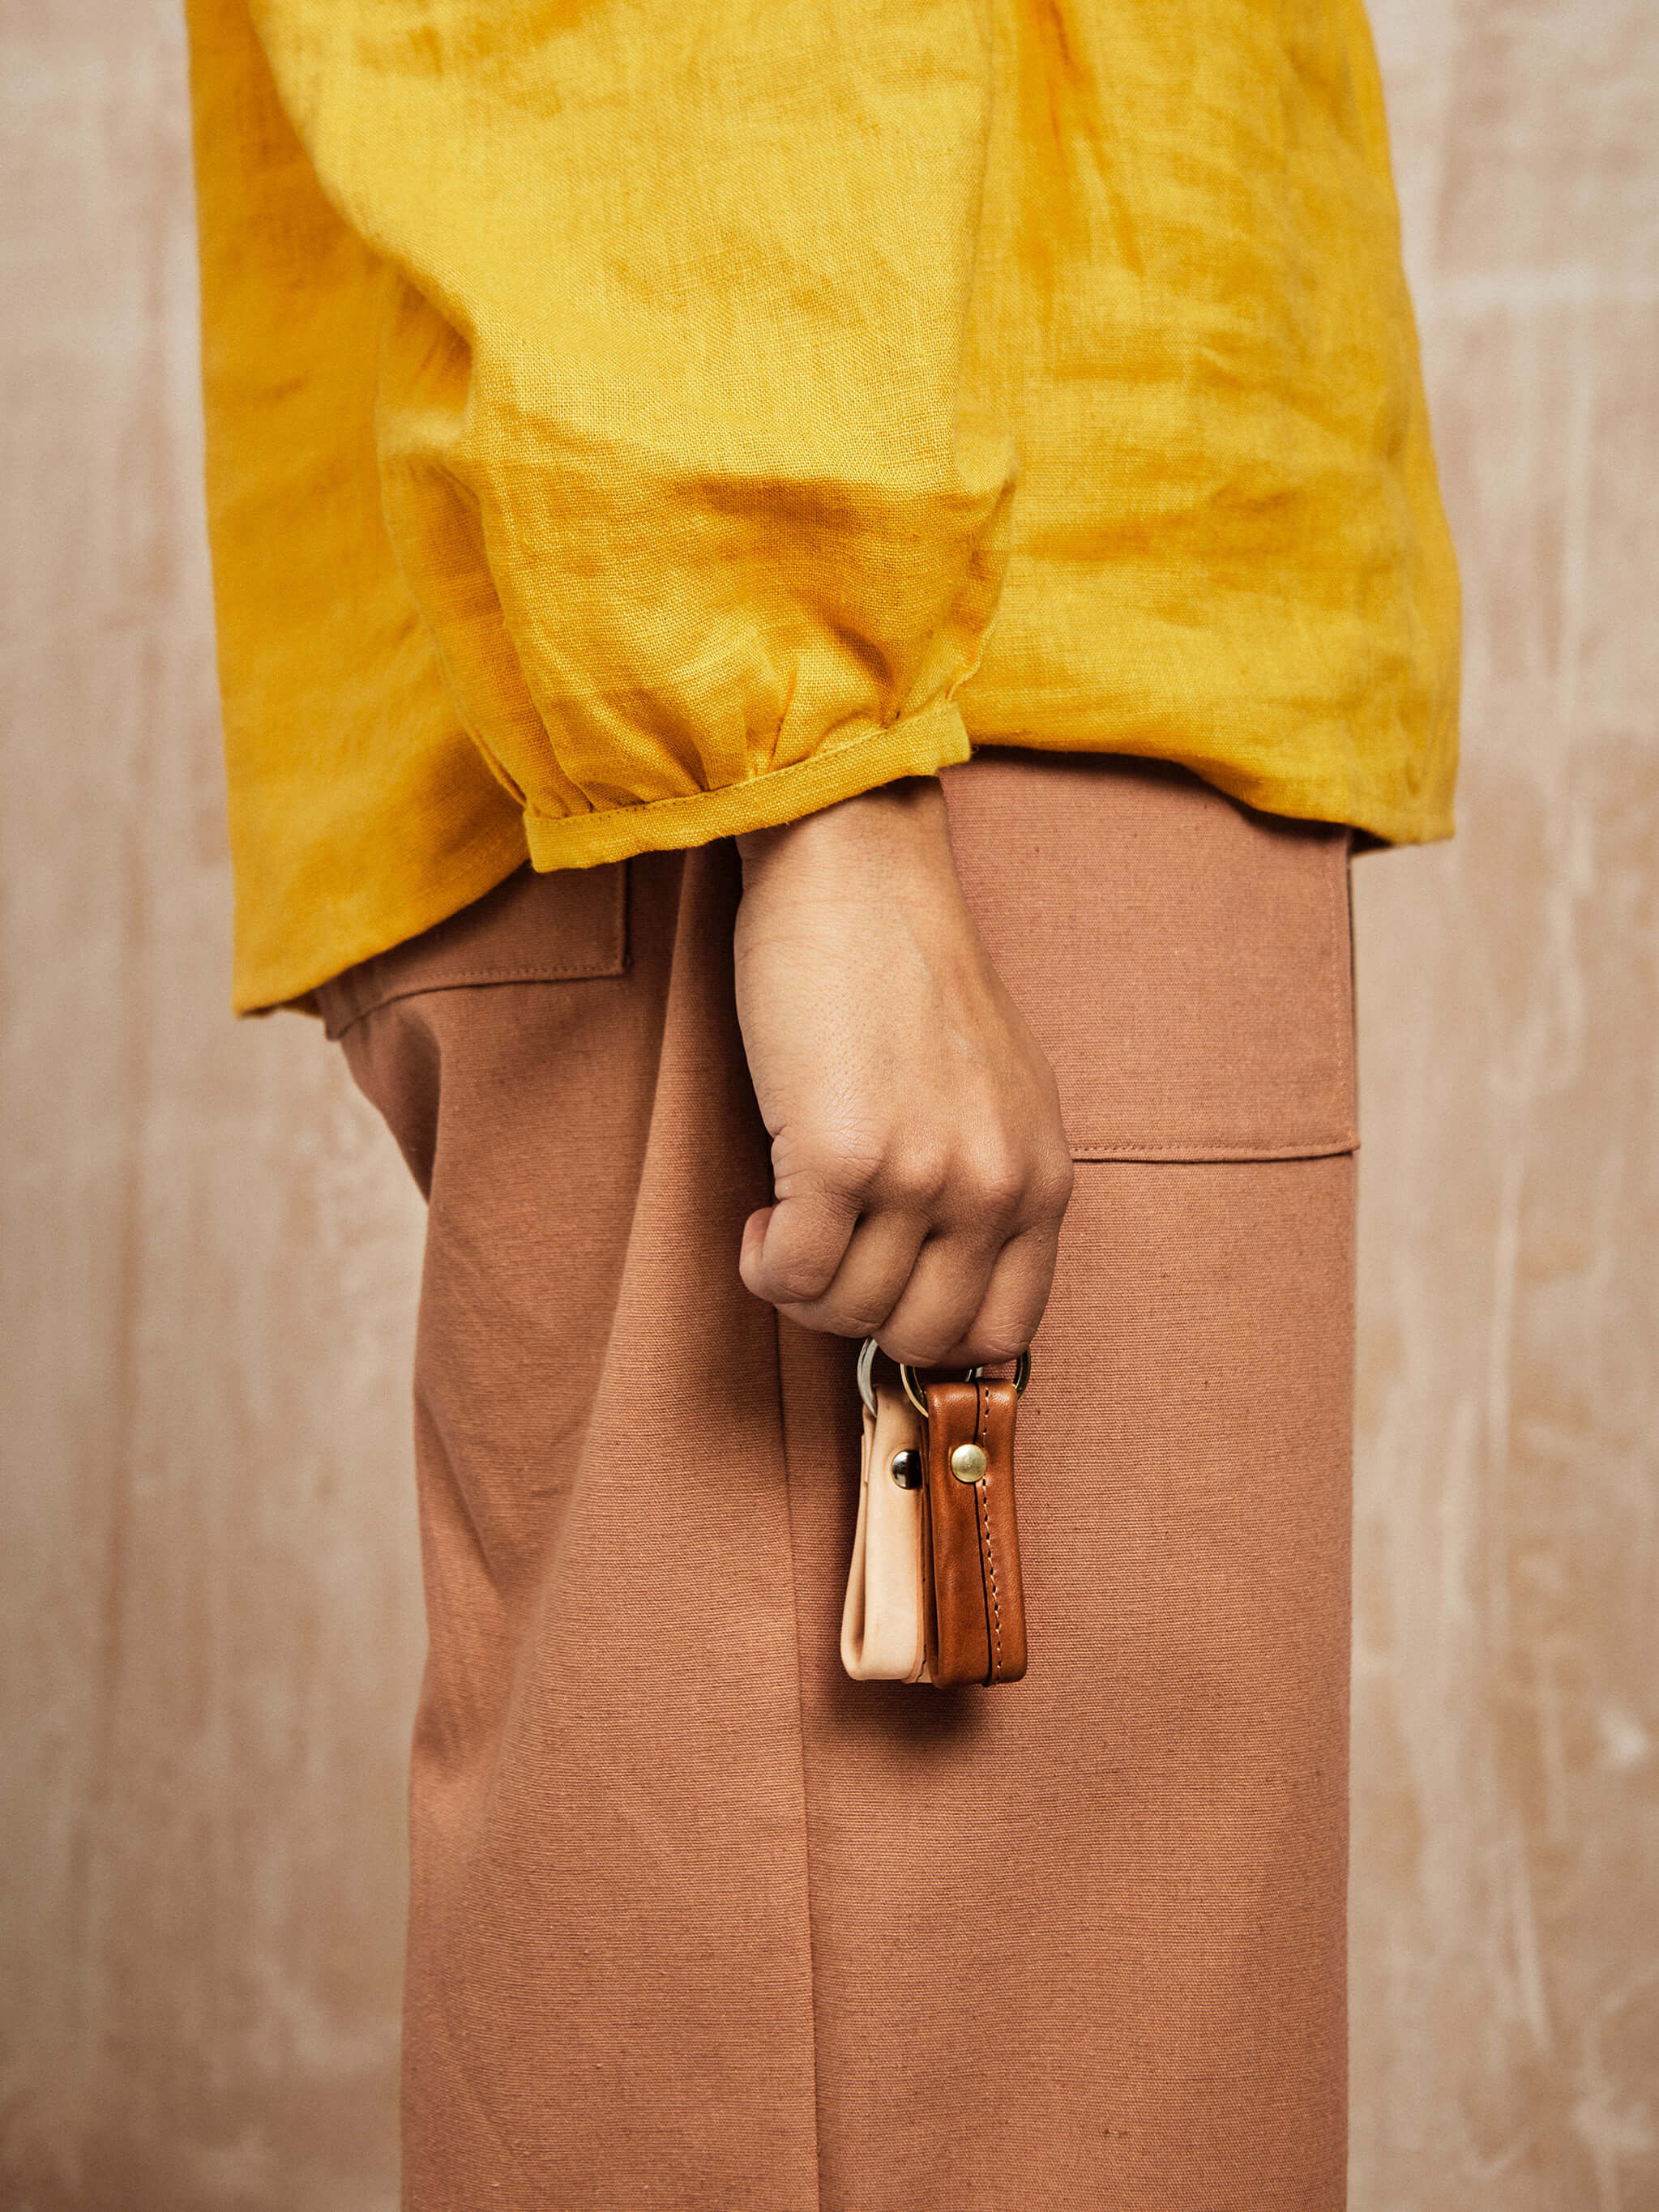 Colm Crafted Leather Keyring - Nude